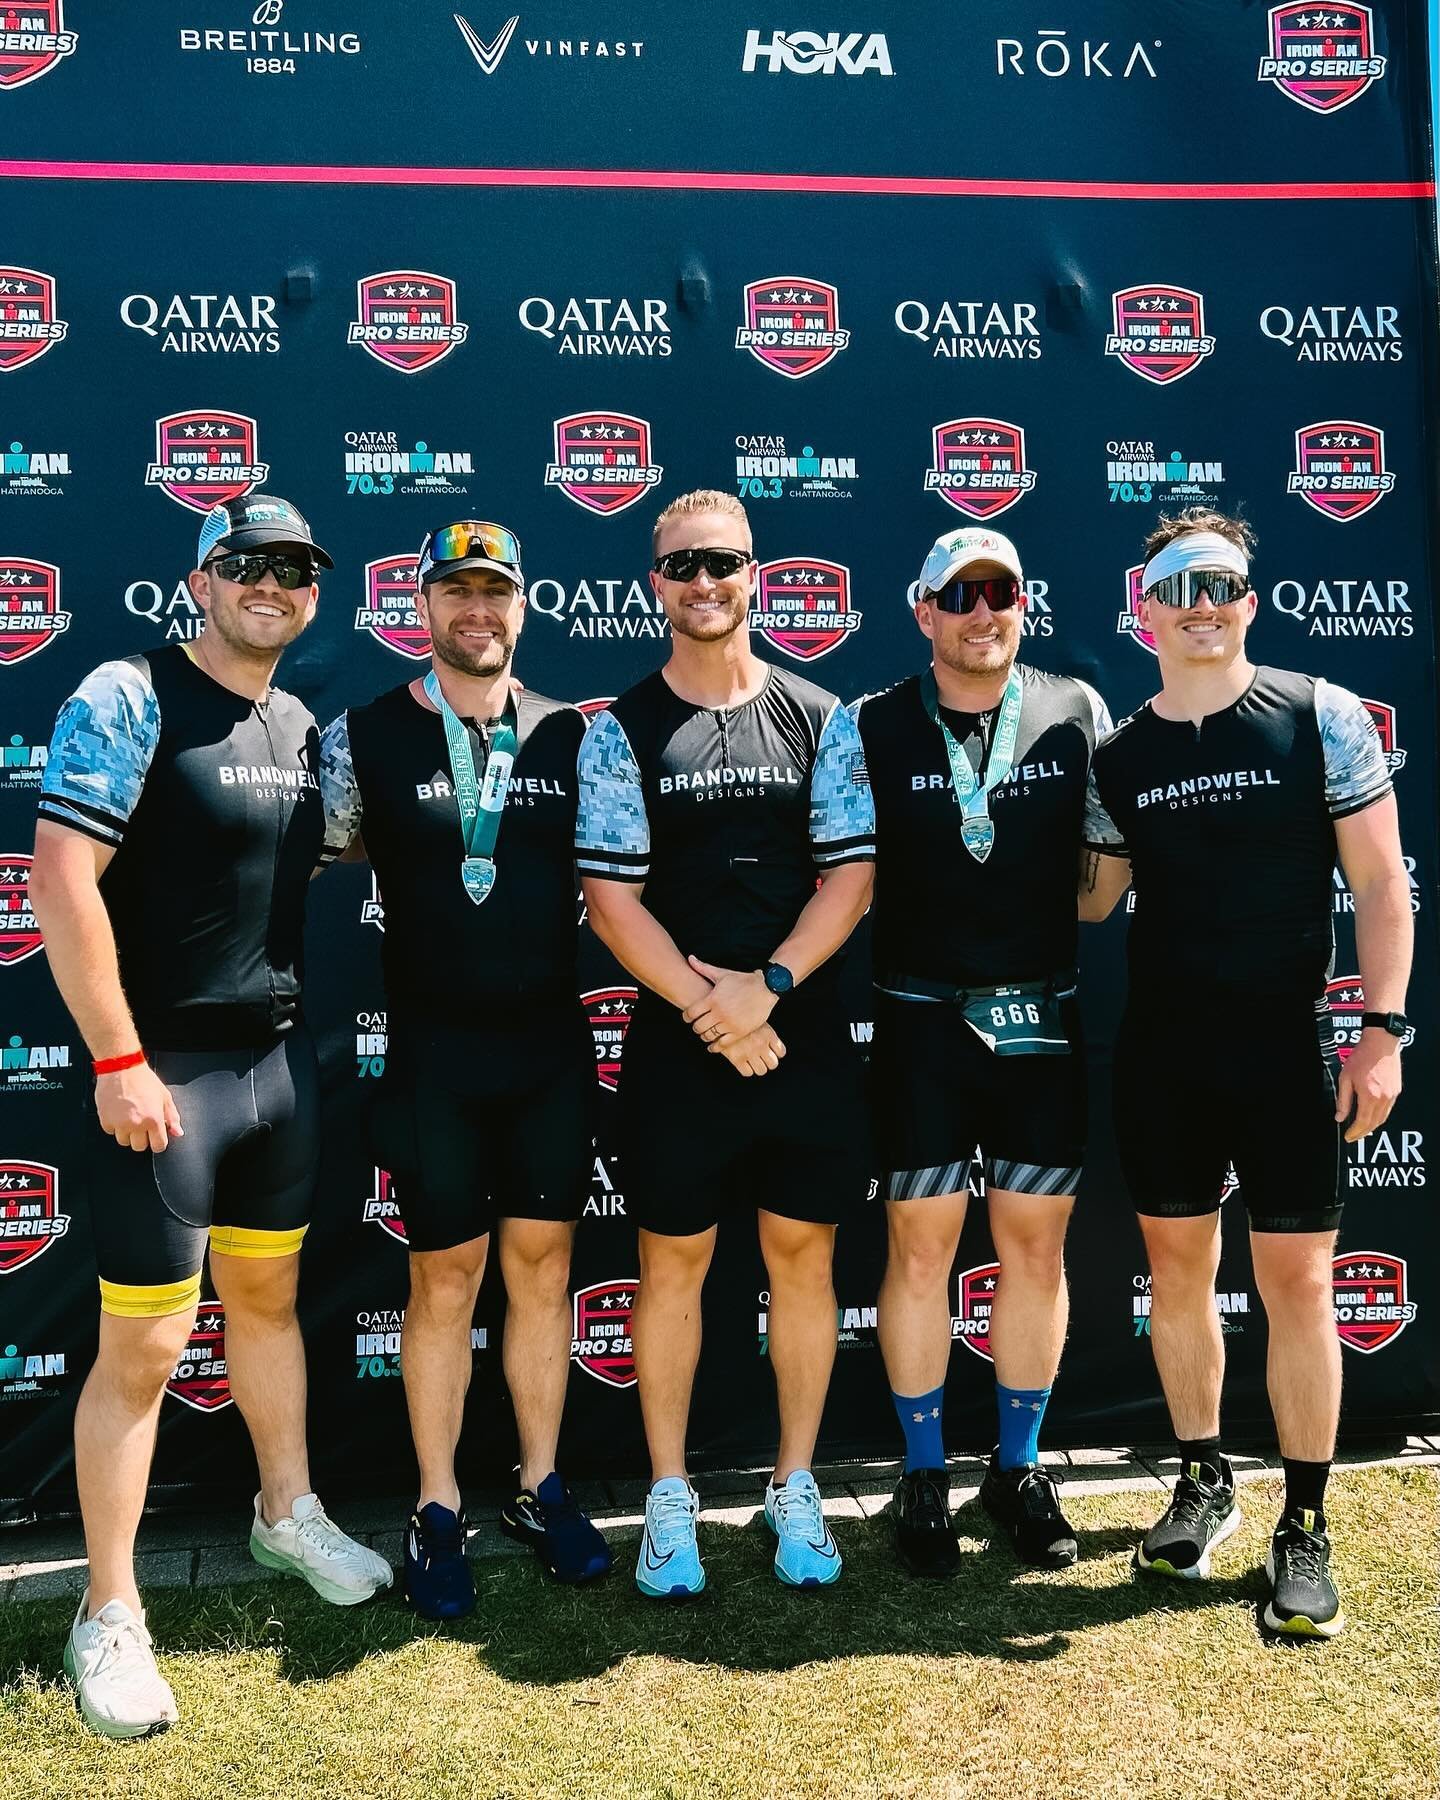 Spent the weekend in Chattanooga for Ironman 70.3 with my husband, all his buddies and their wives who just so happen to be some of my dearest friends💪🏻
⠀⠀⠀⠀⠀⠀⠀⠀⠀
Unfortunately, James got hurt the week before the race and wasn&rsquo;t able to compe